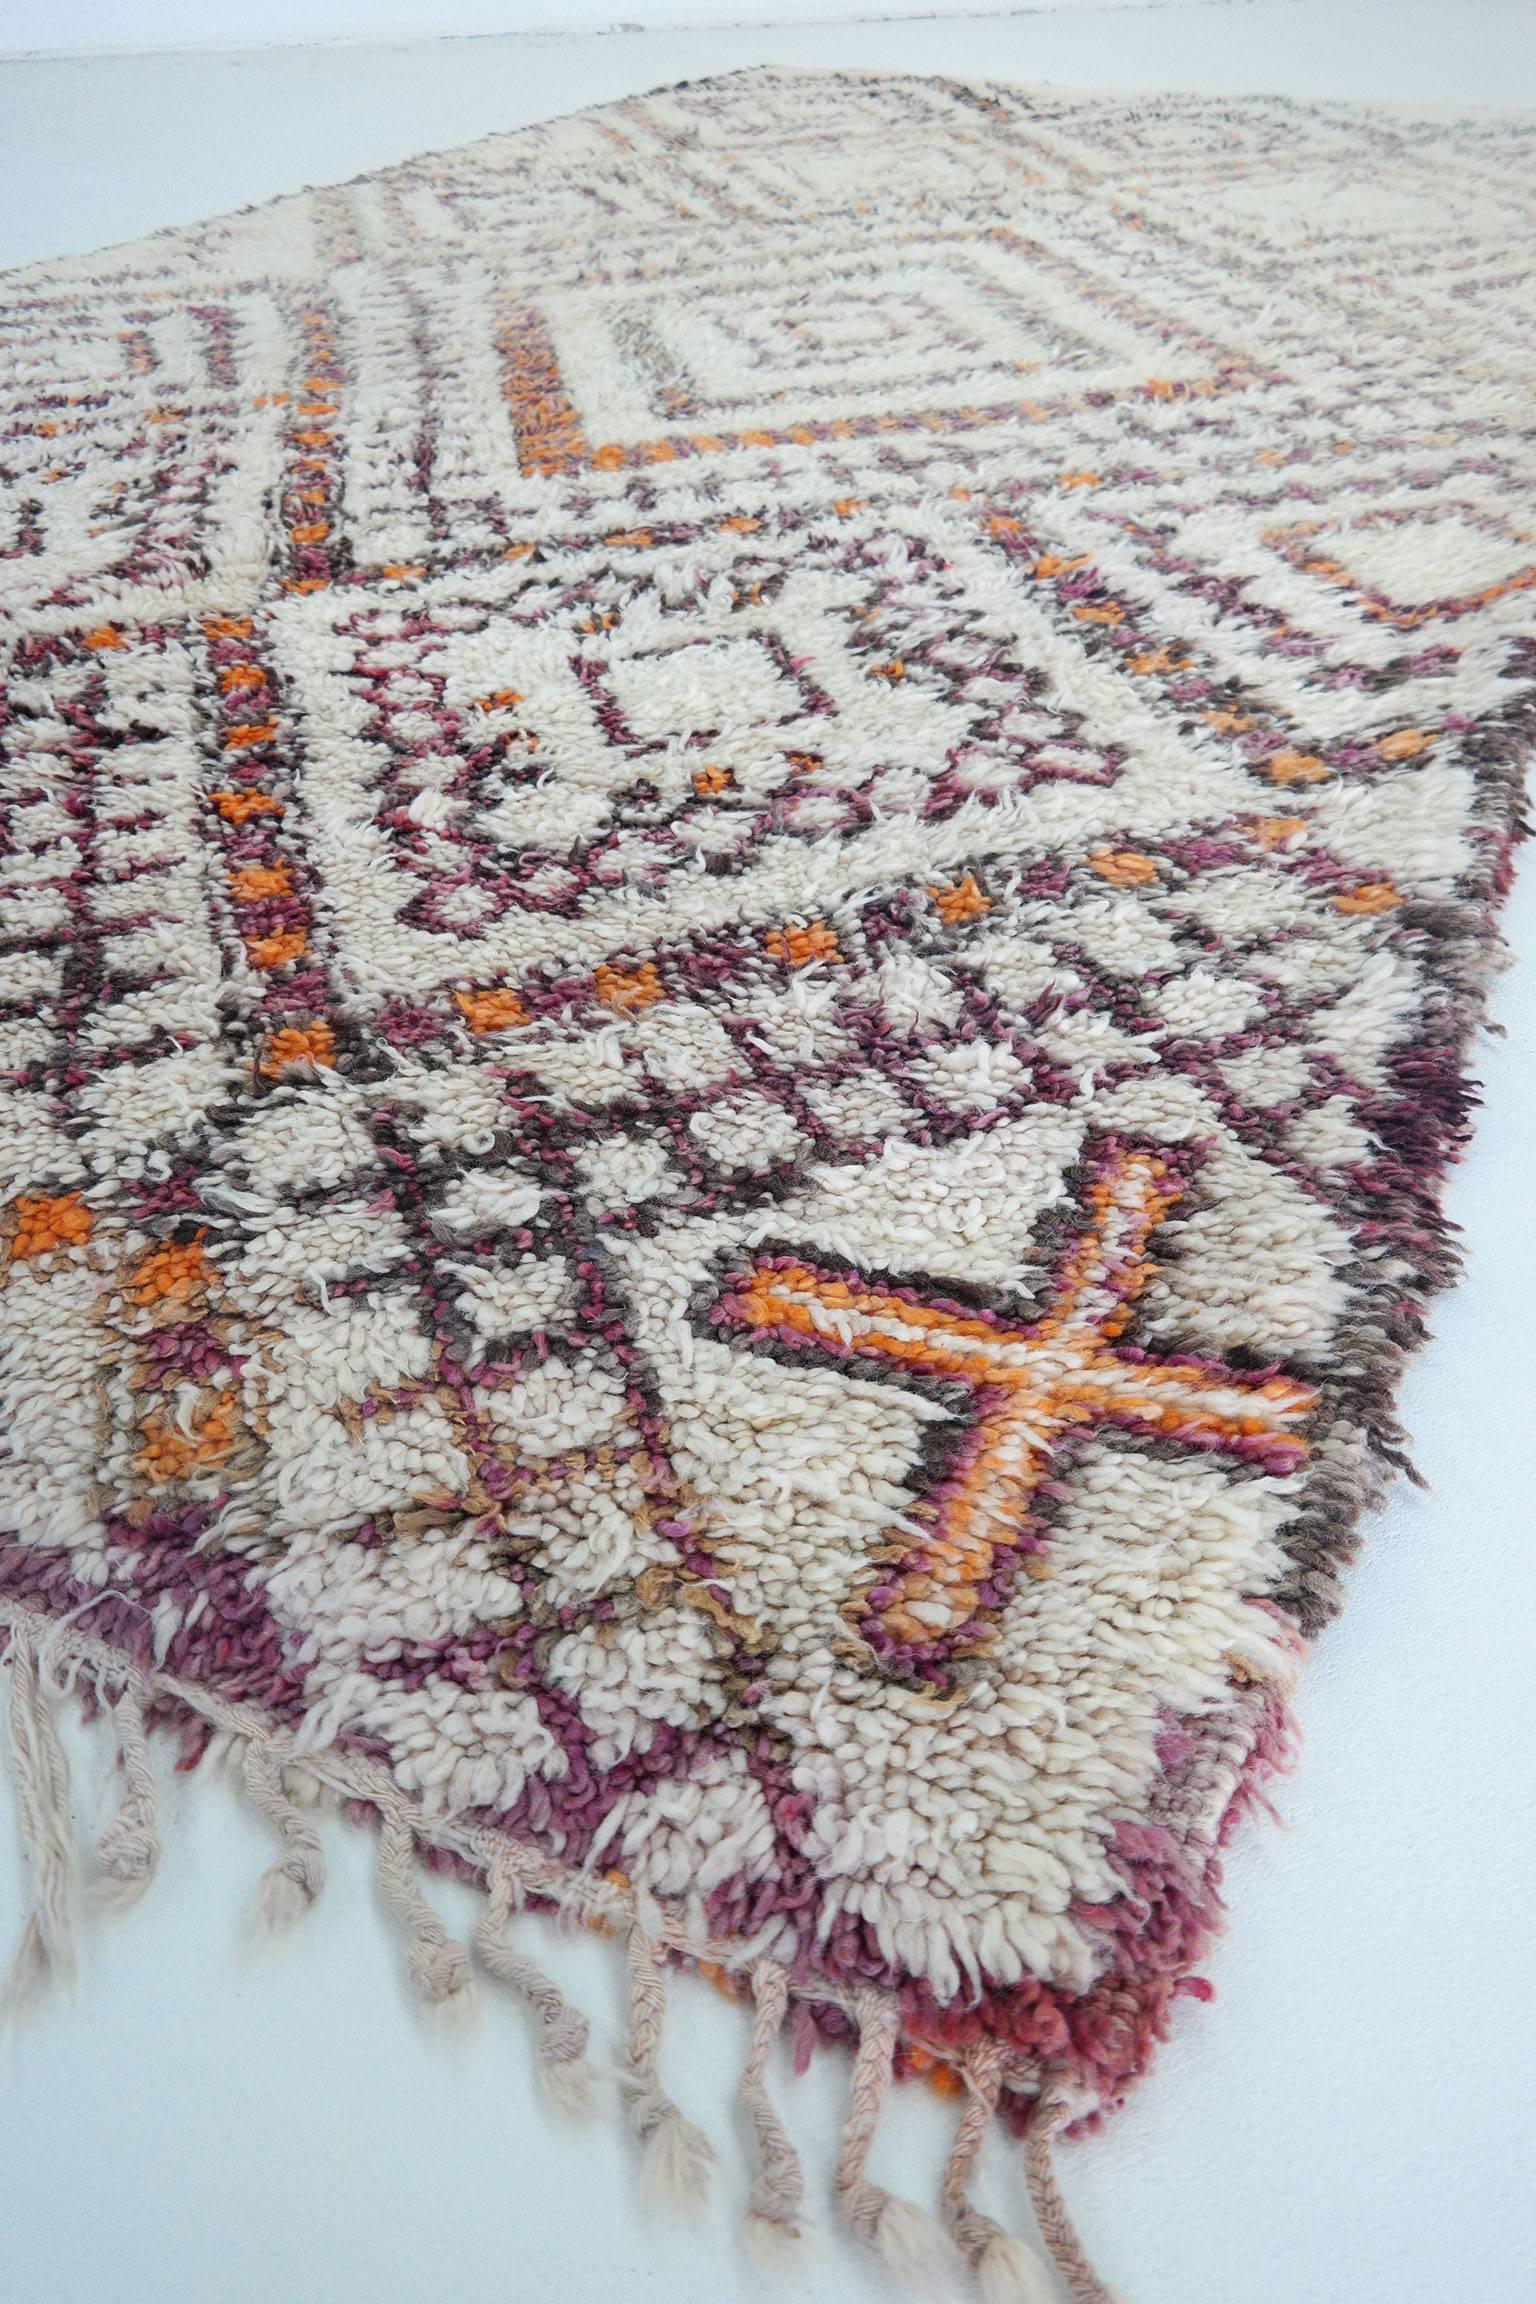 Beni Ourain Rug

As stunning vintage Moroccan rug in great condition. This beauty has a pattern with beautiful color accent and a beautiful butter cream base. The shades of orange and aubergine purple are naturel dye. 
Beni Ourain rugs have a story